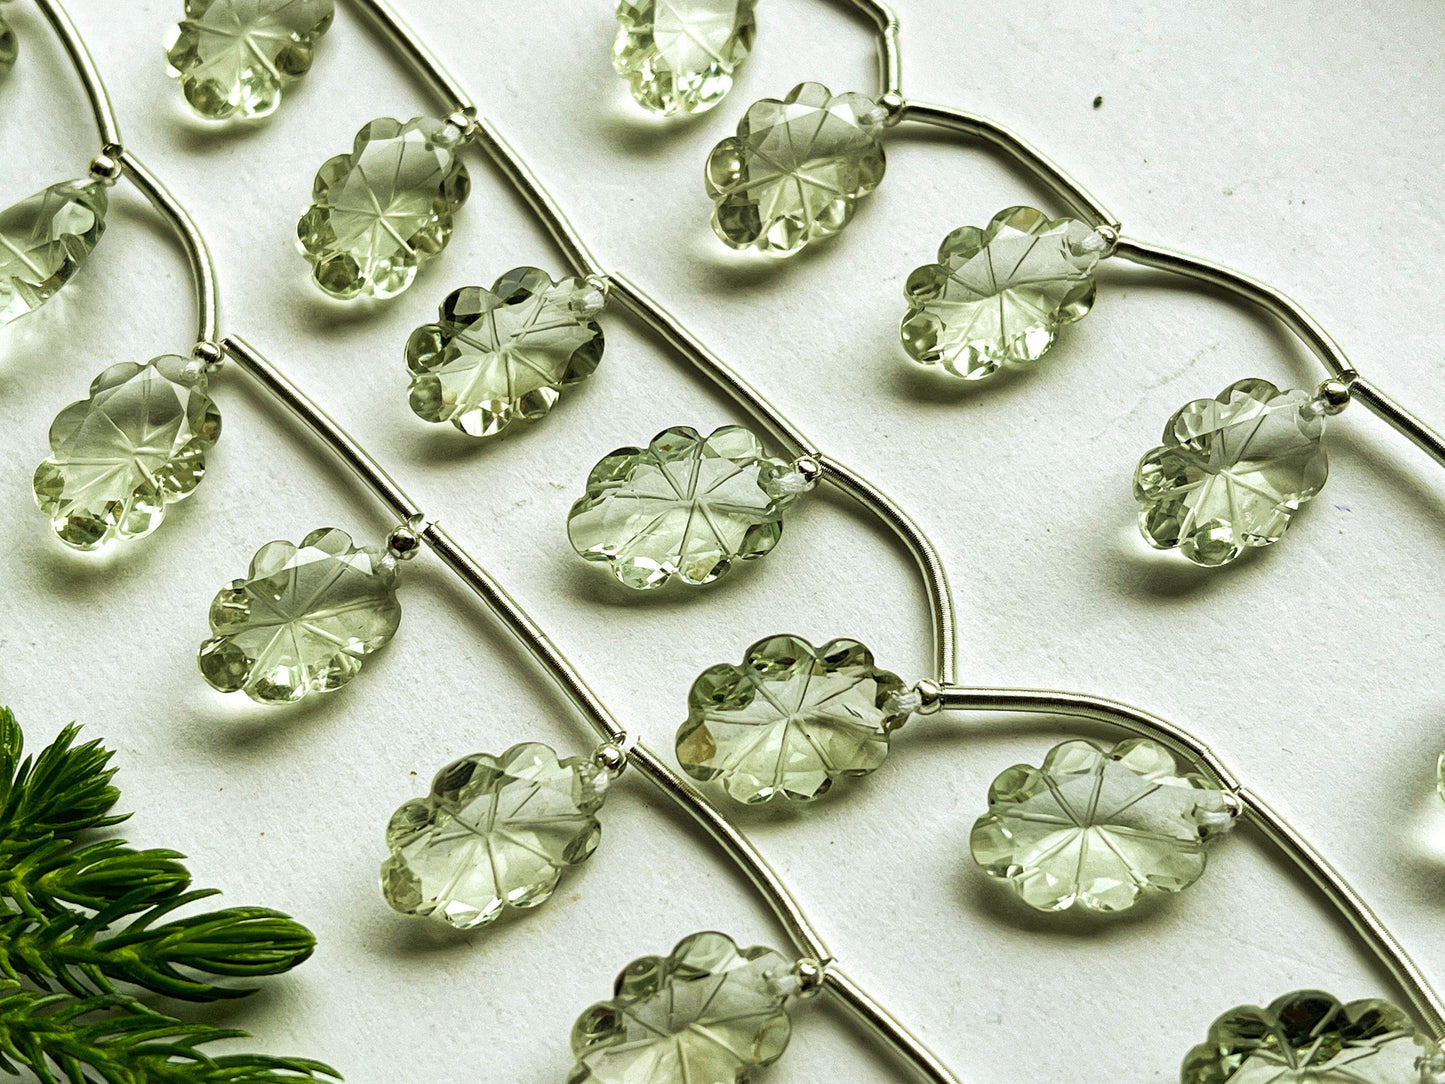 8 Pieces GREEN AMETHYST Laser Flower Carving Beads, Green Amethyst Flower Carving, Green Amethyst Carving Beads, Green Amethyst Beads Beadsforyourjewelry